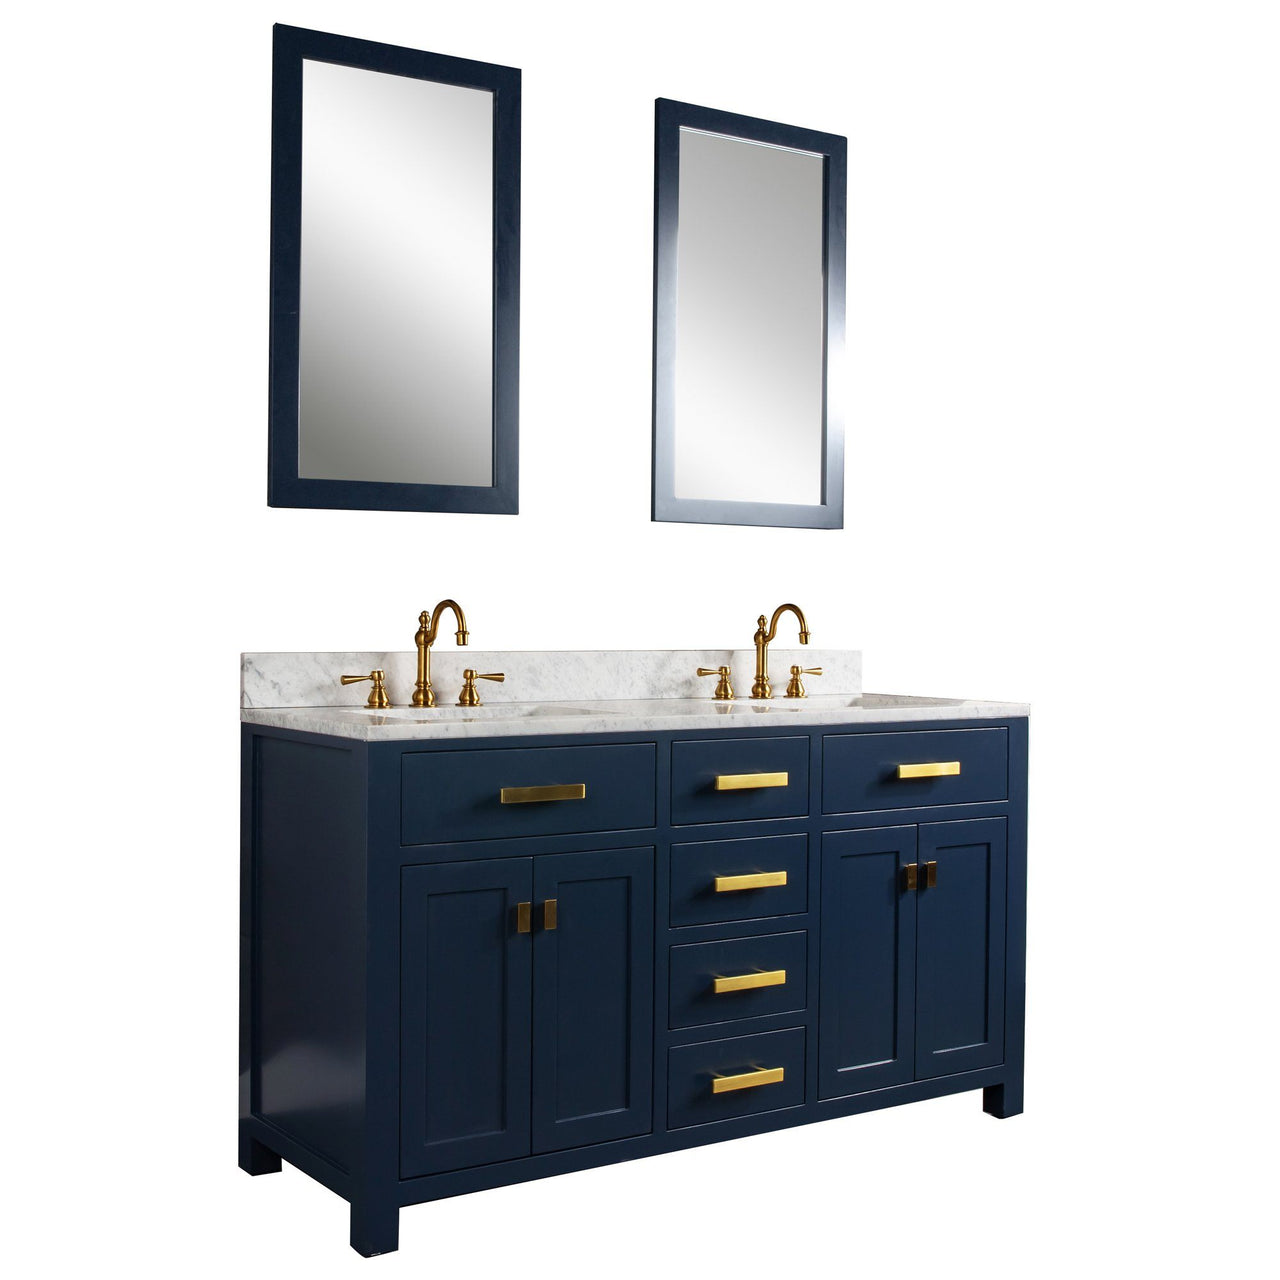 Madison 60-Inch Double Sink Carrara White Marble Vanity In Monarch BlueWith F2-0012-06-TL Lavatory Faucet(s) Vanity Water Creation 